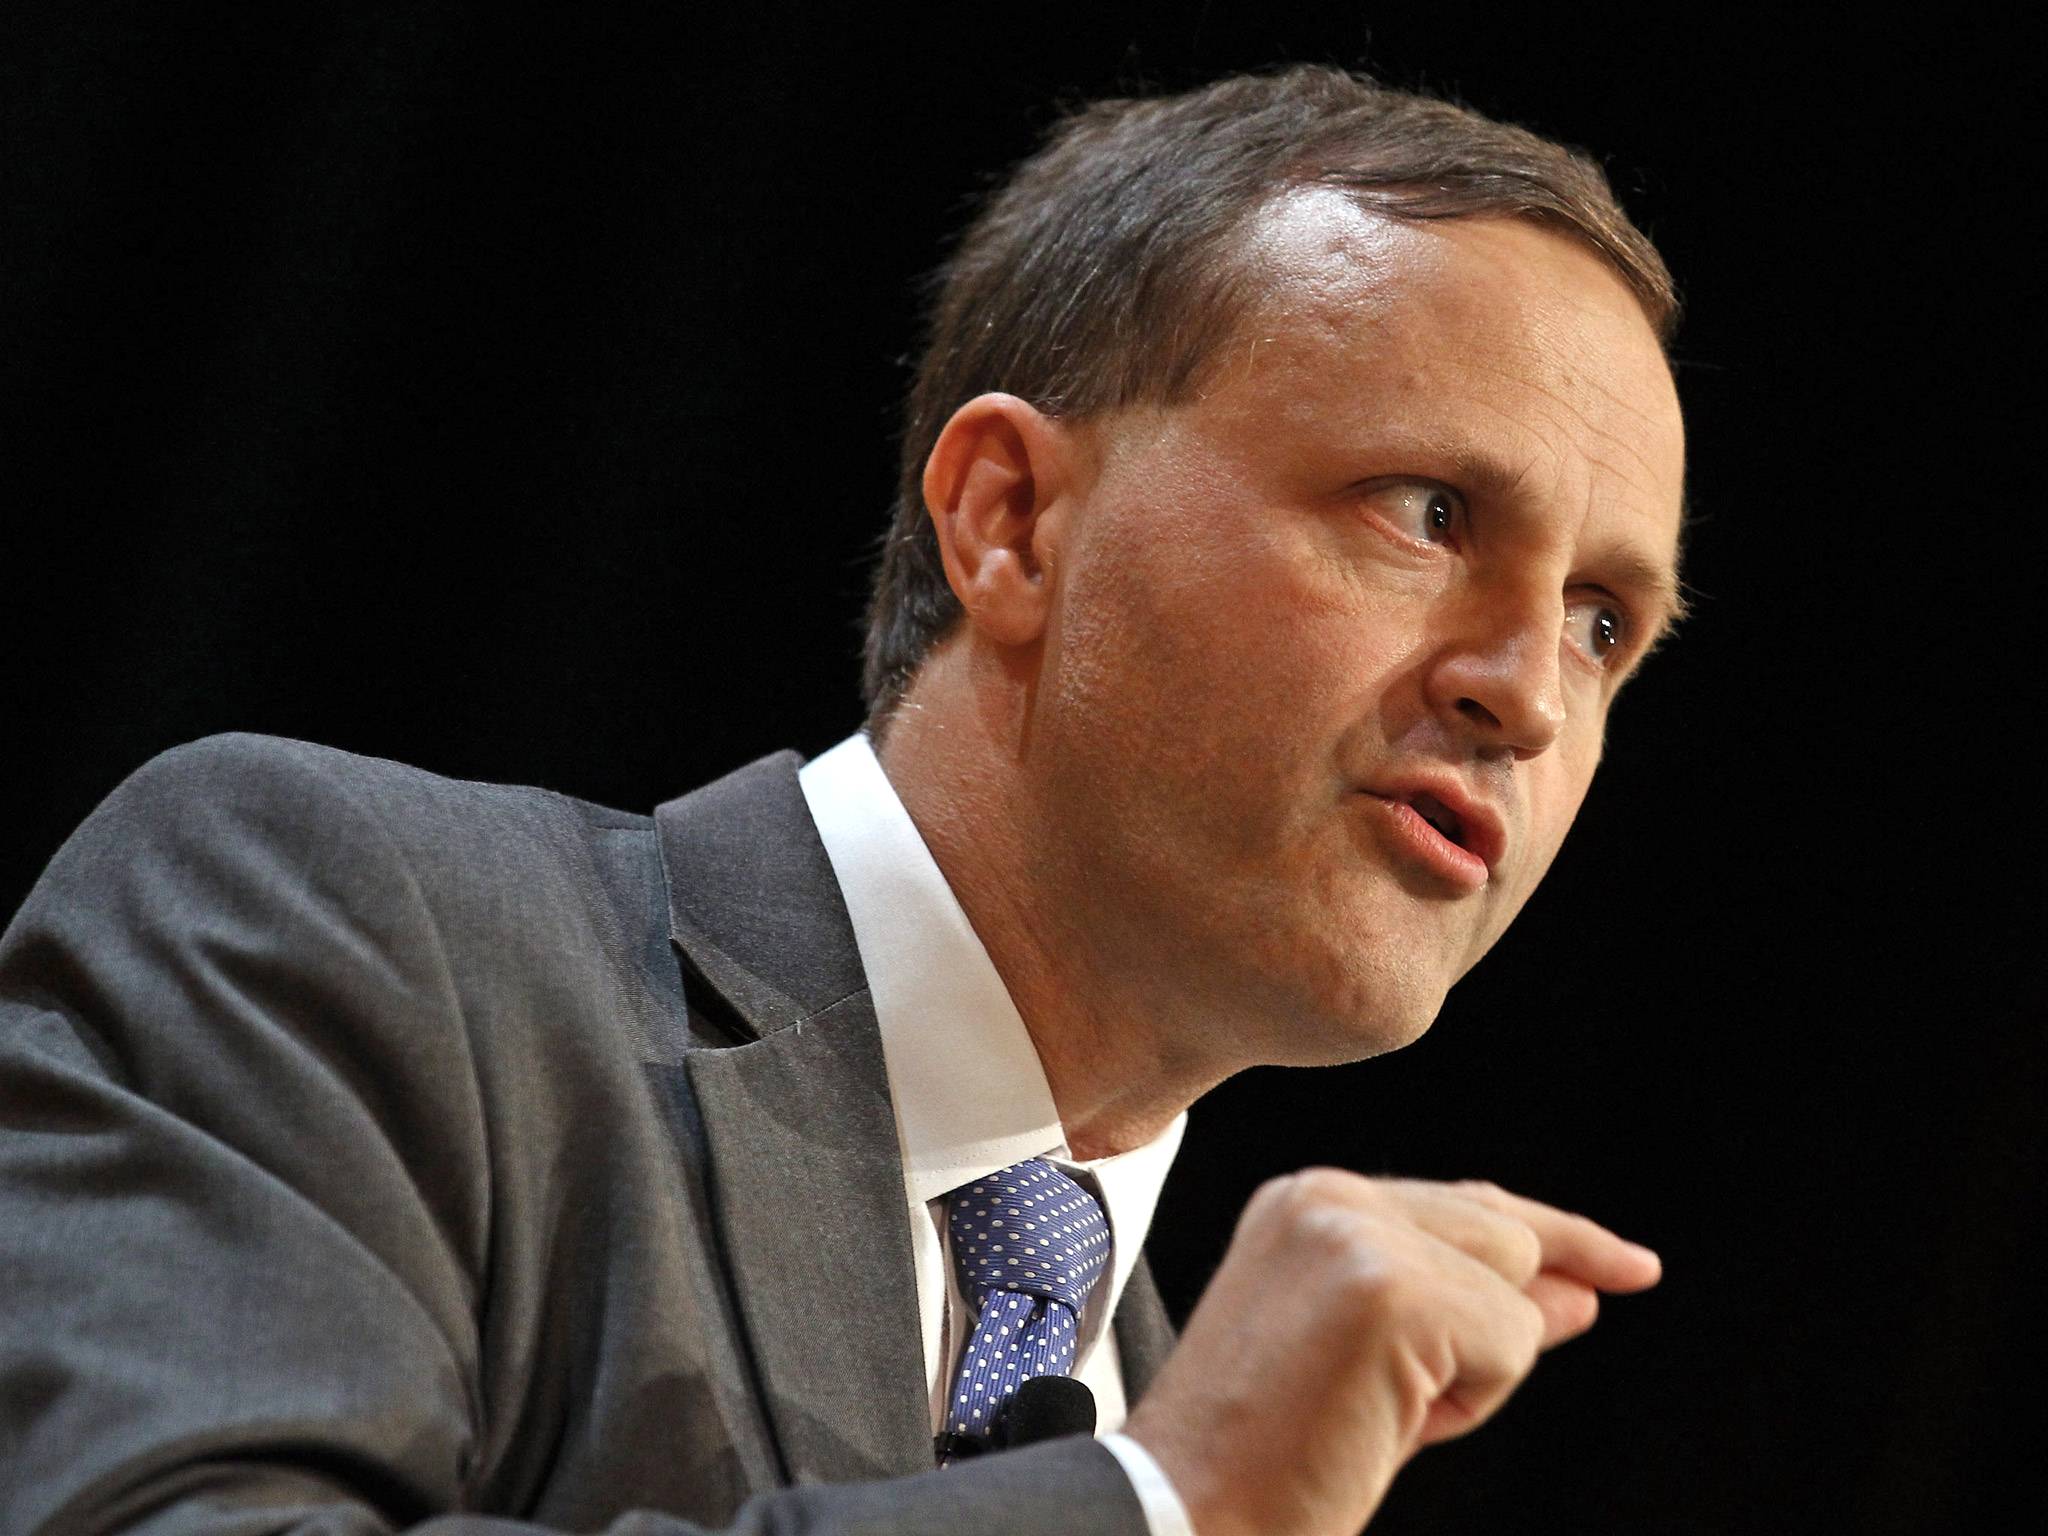 Steve Webb, Minister of State for Pensions (Getty)